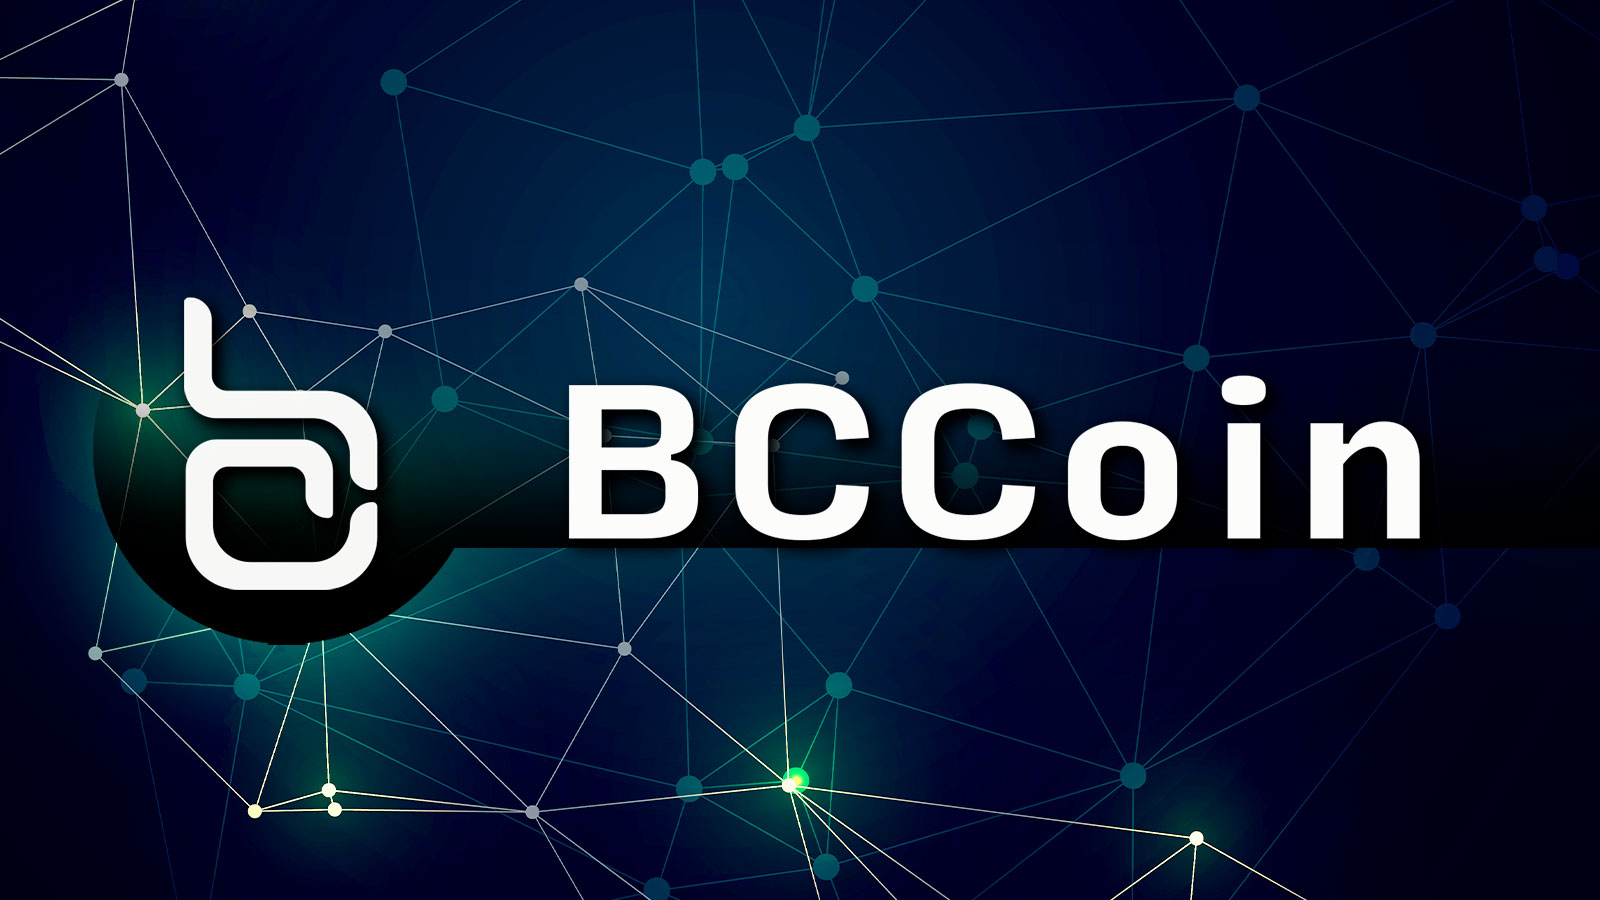 BlackCard Introduces BcCoin In Their Attempt to Enter Financial Transactions Market